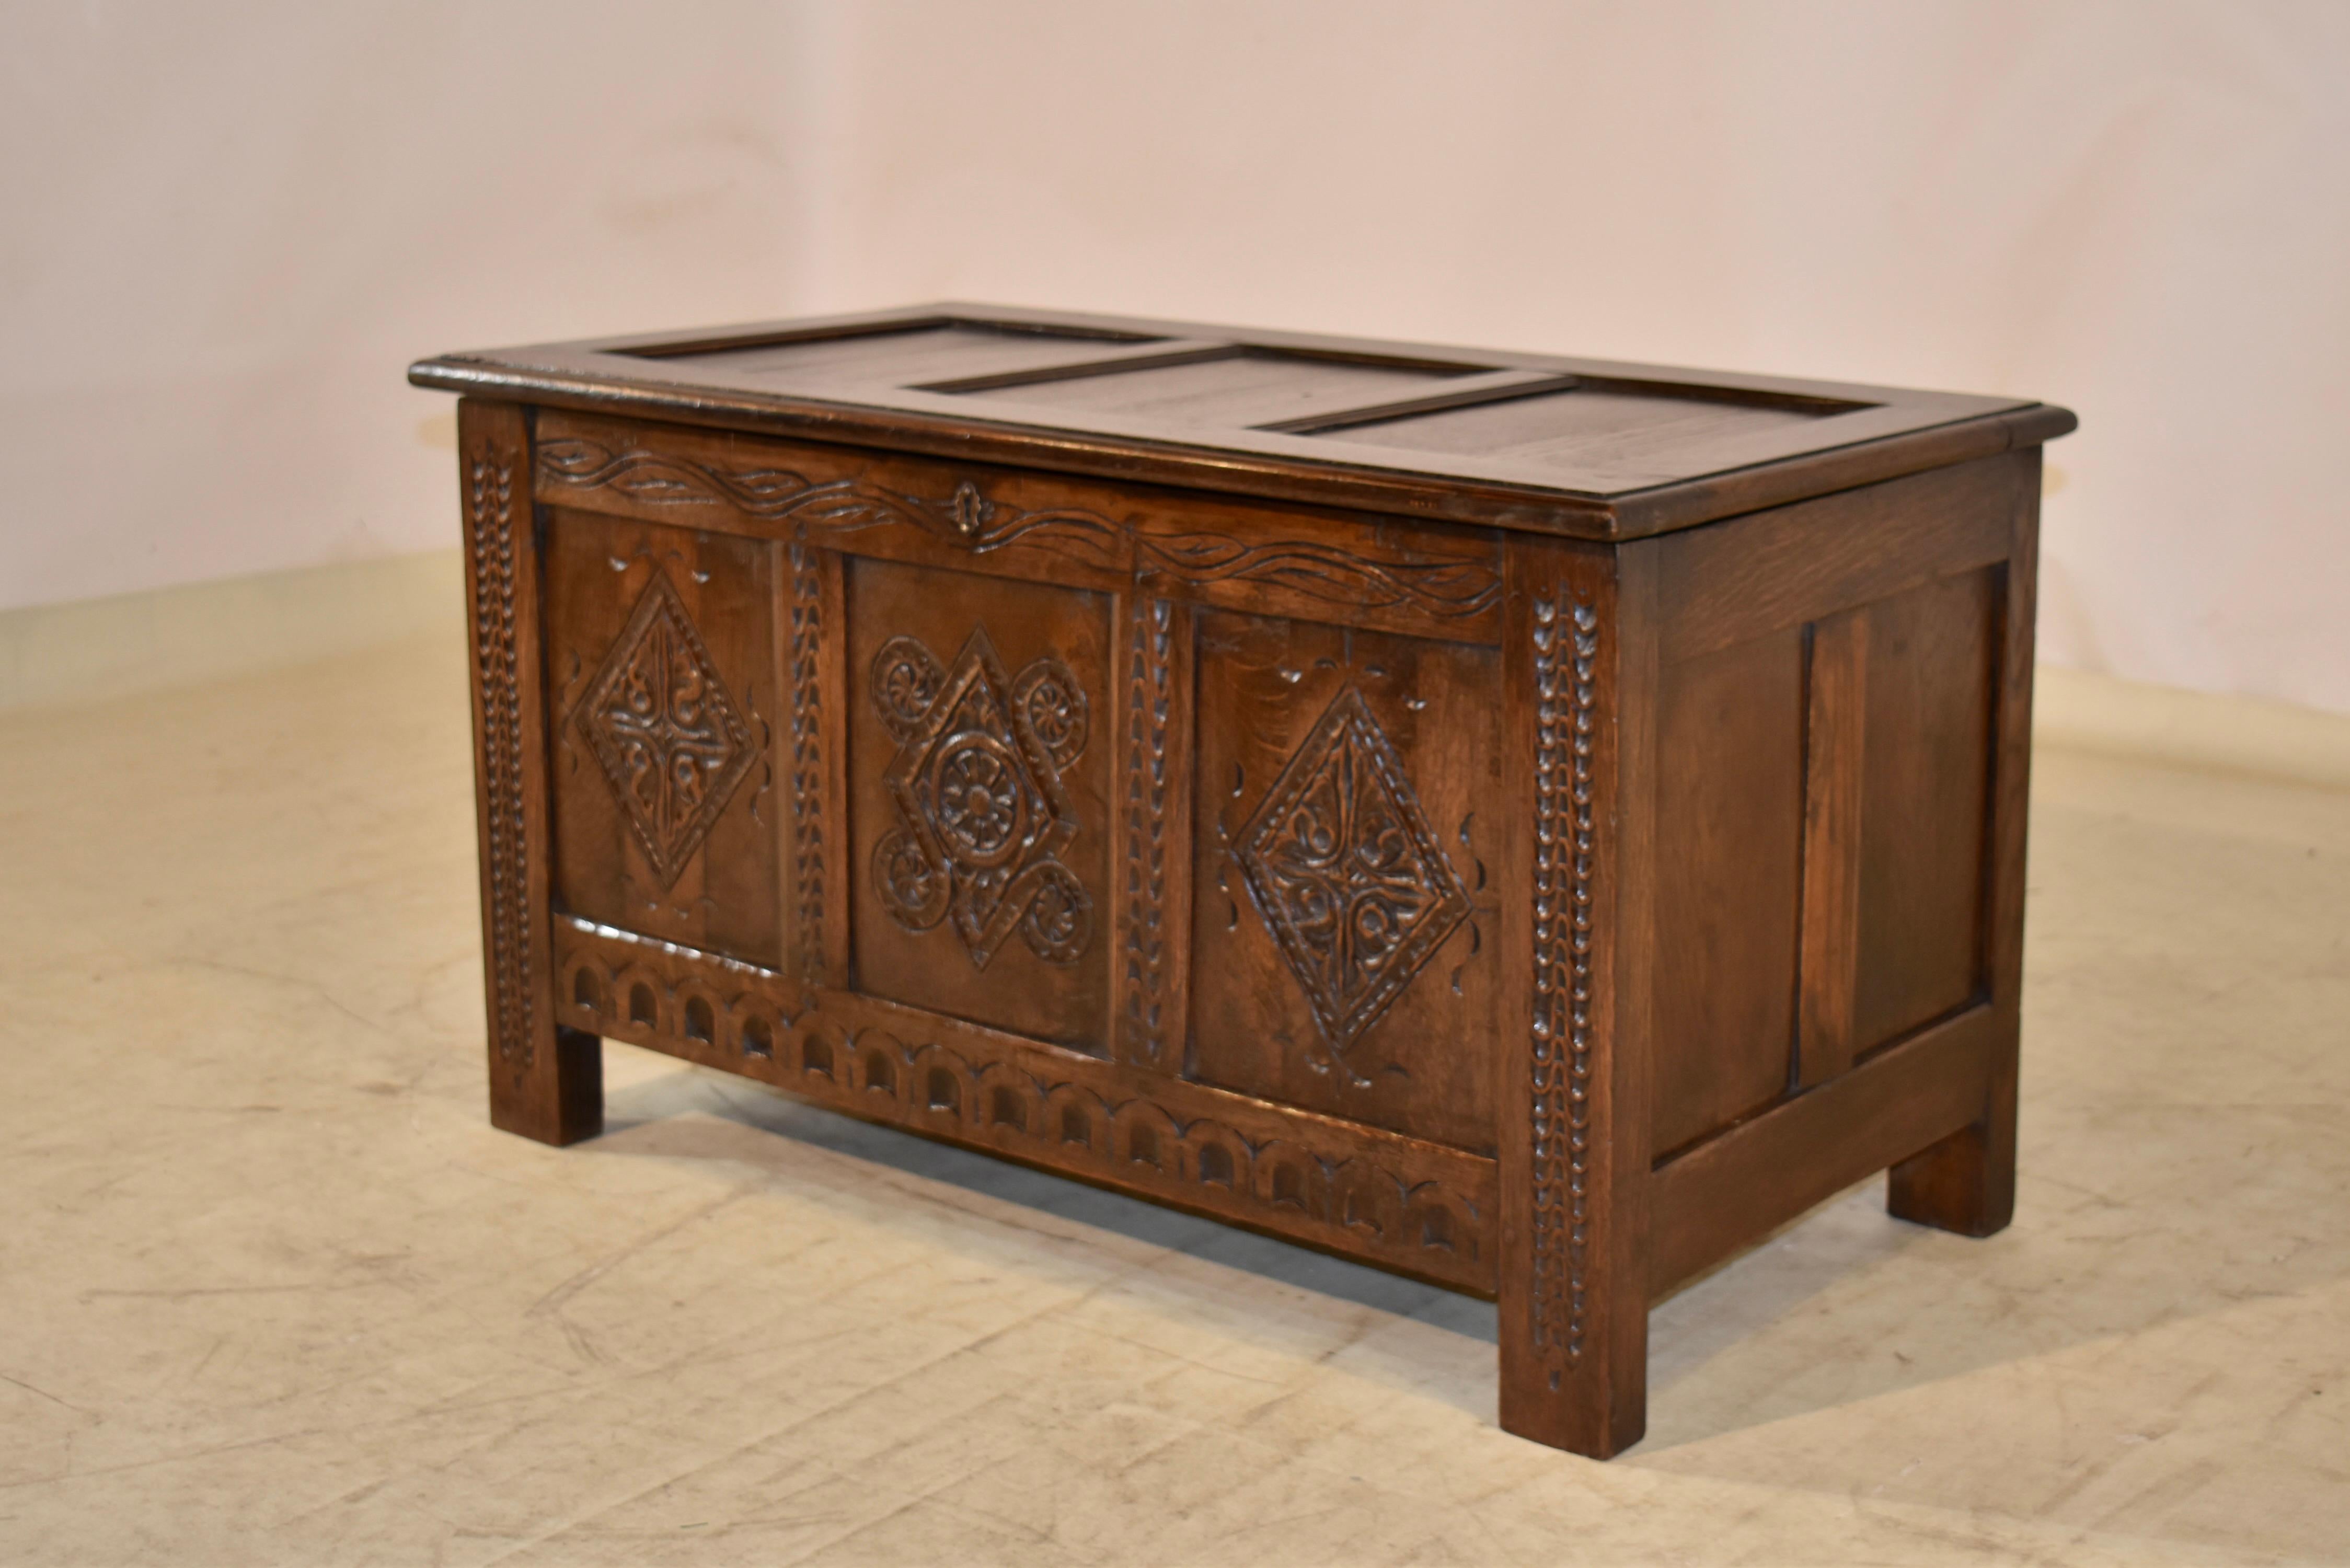 19th Century English Oak Carved Blanket Chest For Sale 2